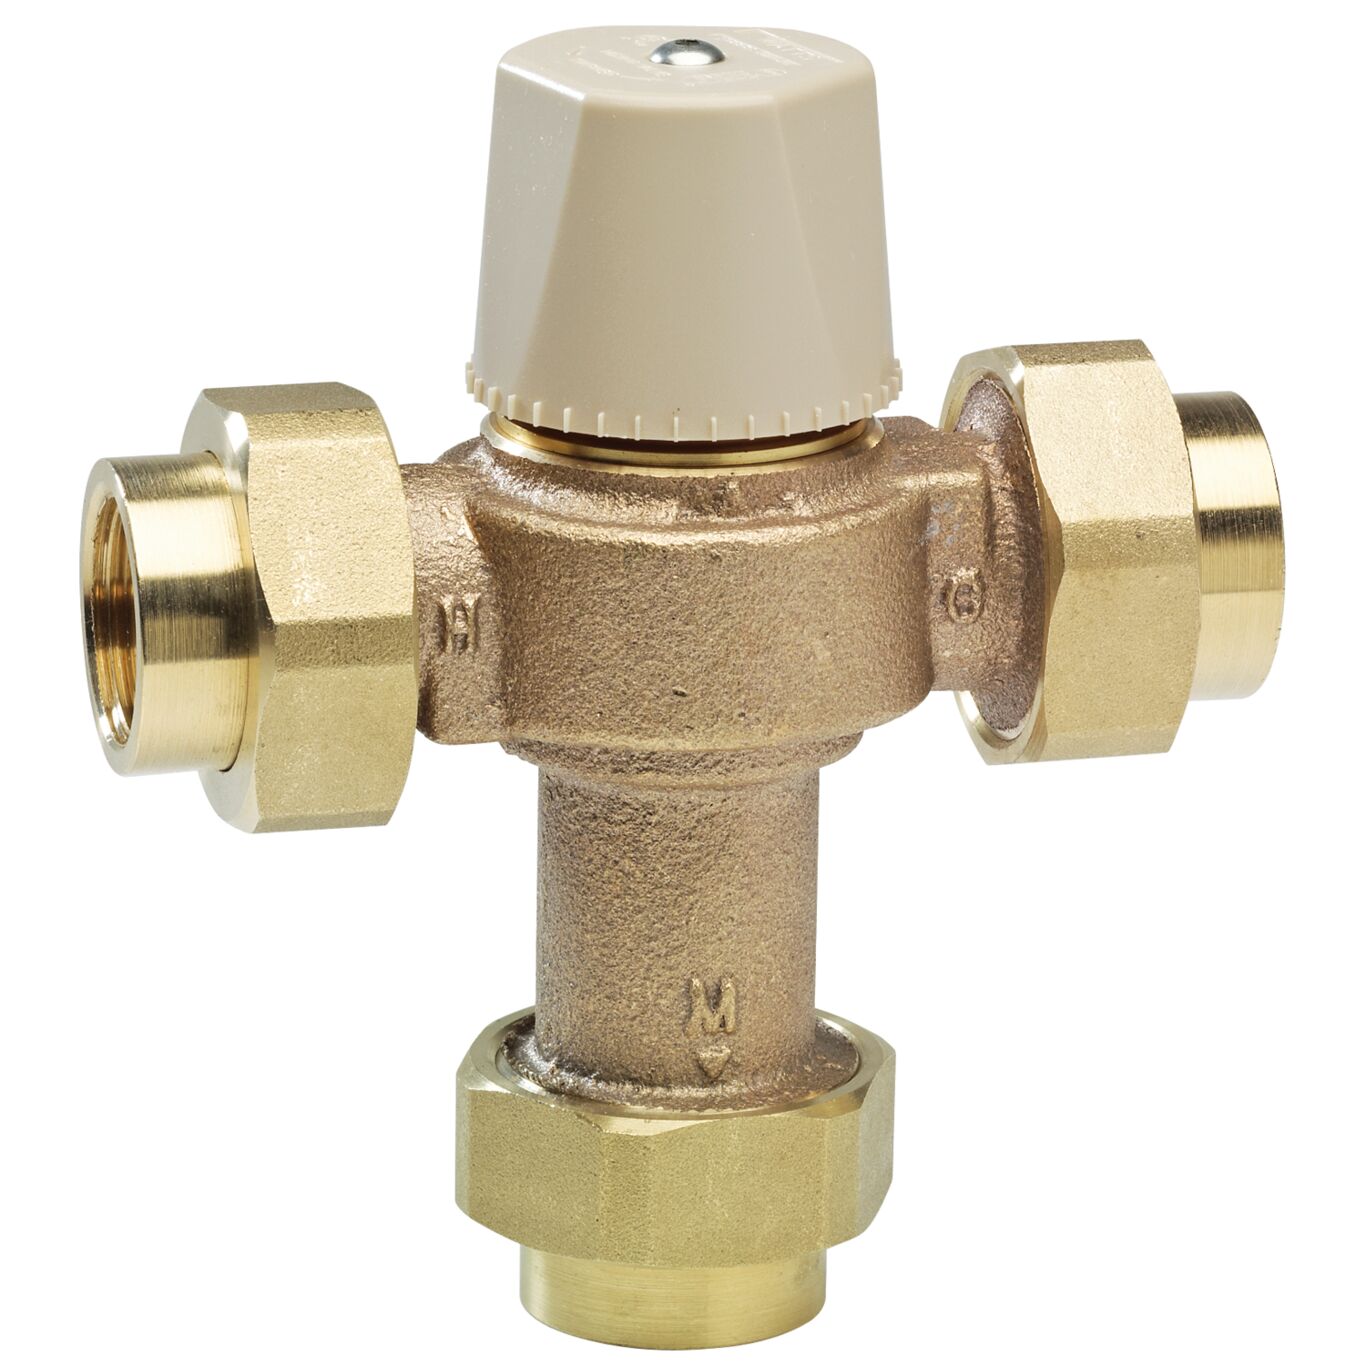 Leonard LV Thermostatic Mixing Valve 2 Inlet, 2 Outlet, Rough